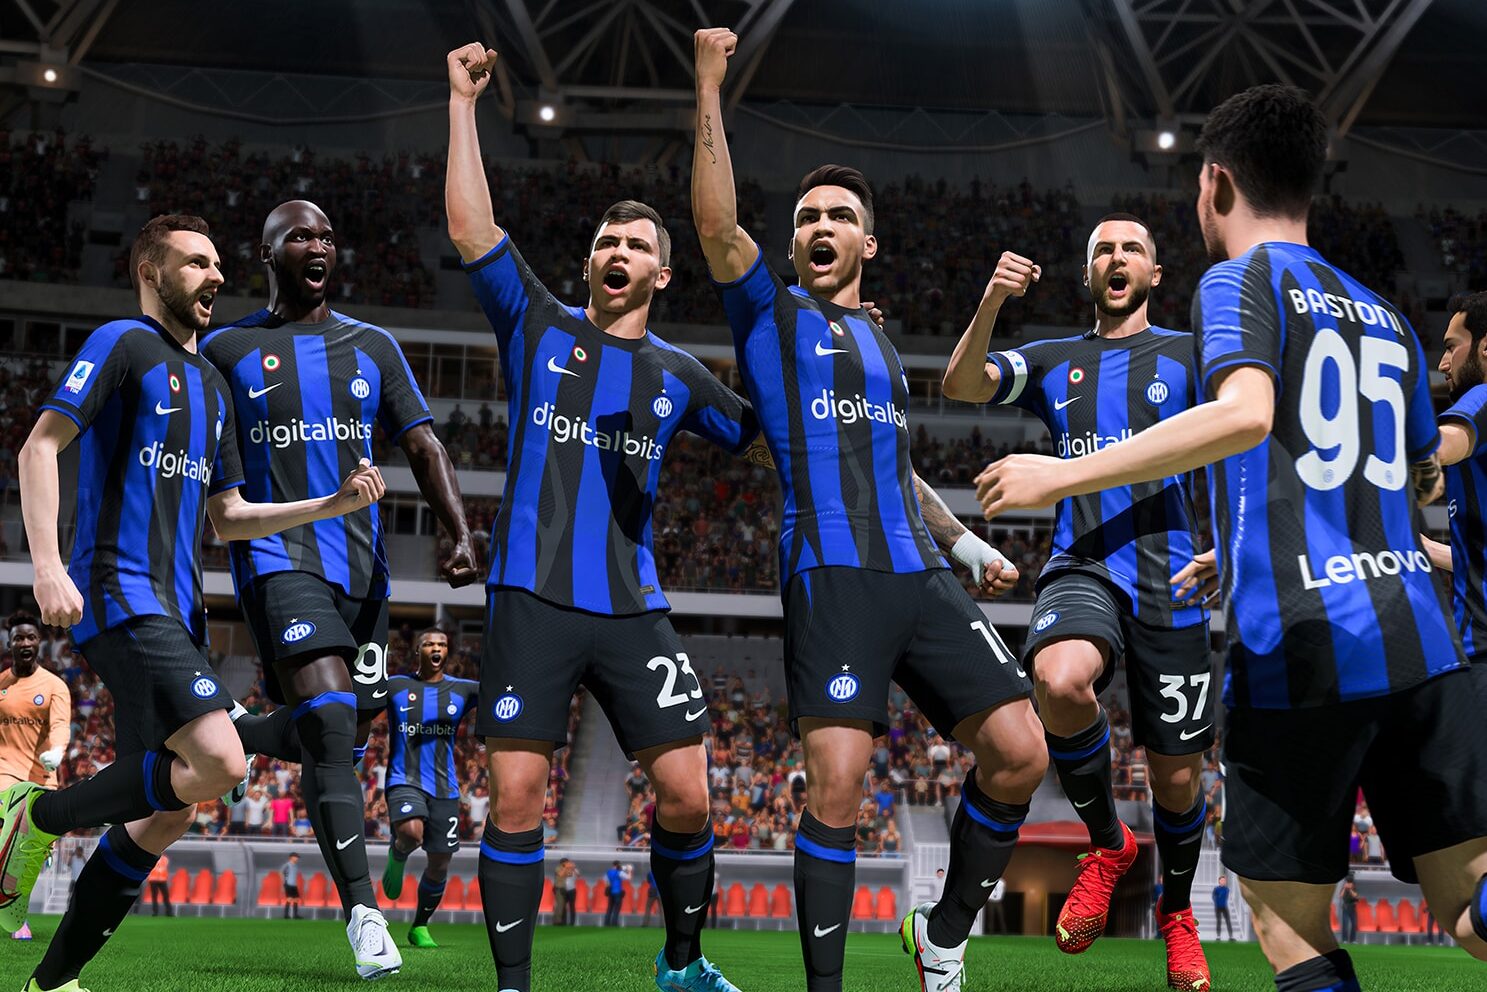 How EA Sports Will Stay in the Game Despite End of FIFA Deal